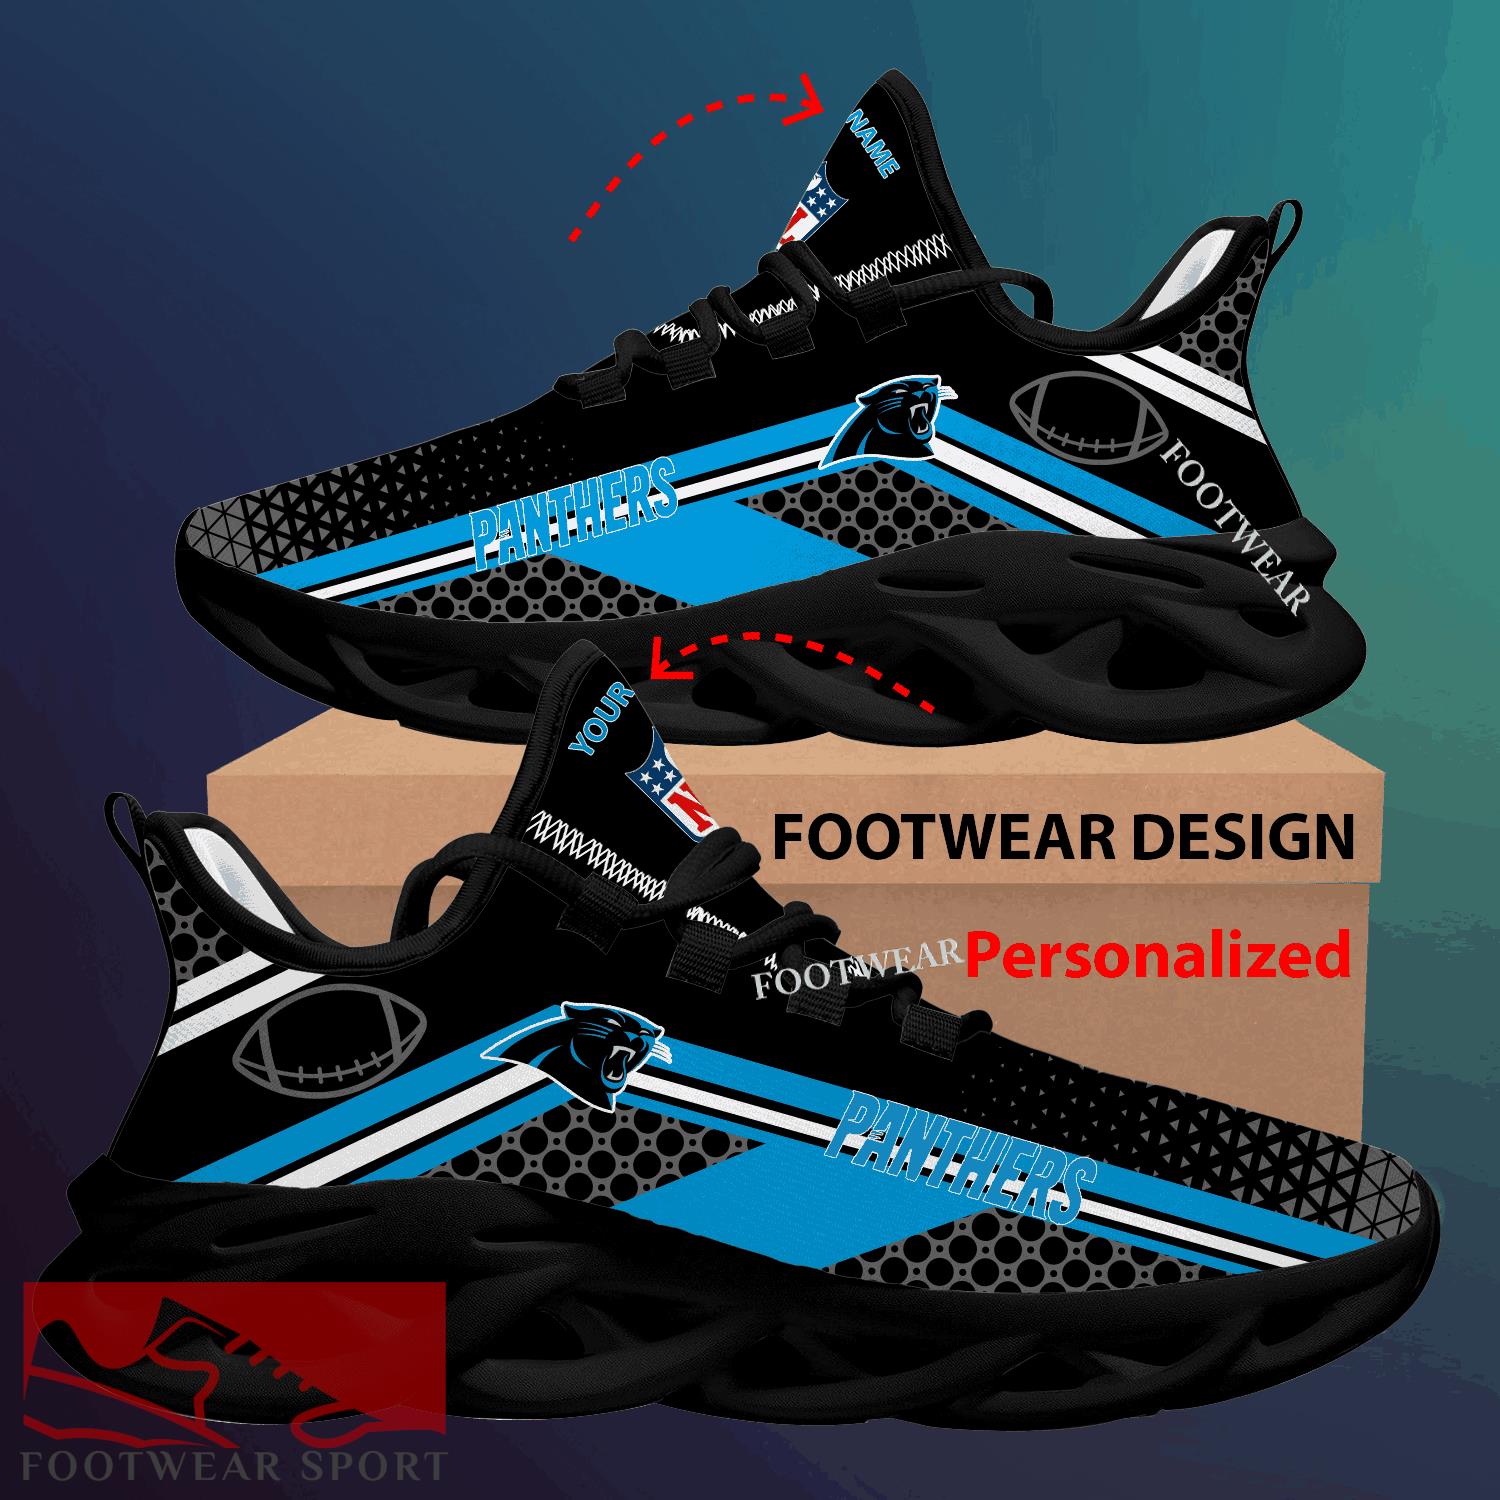 Carolina Panthers Max Soul Shoes New Season Personalized For Men Women Running Sneaker Badge Fans - NFL Carolina Panthers Max Soul Shoes New Season Personalized Photo 2